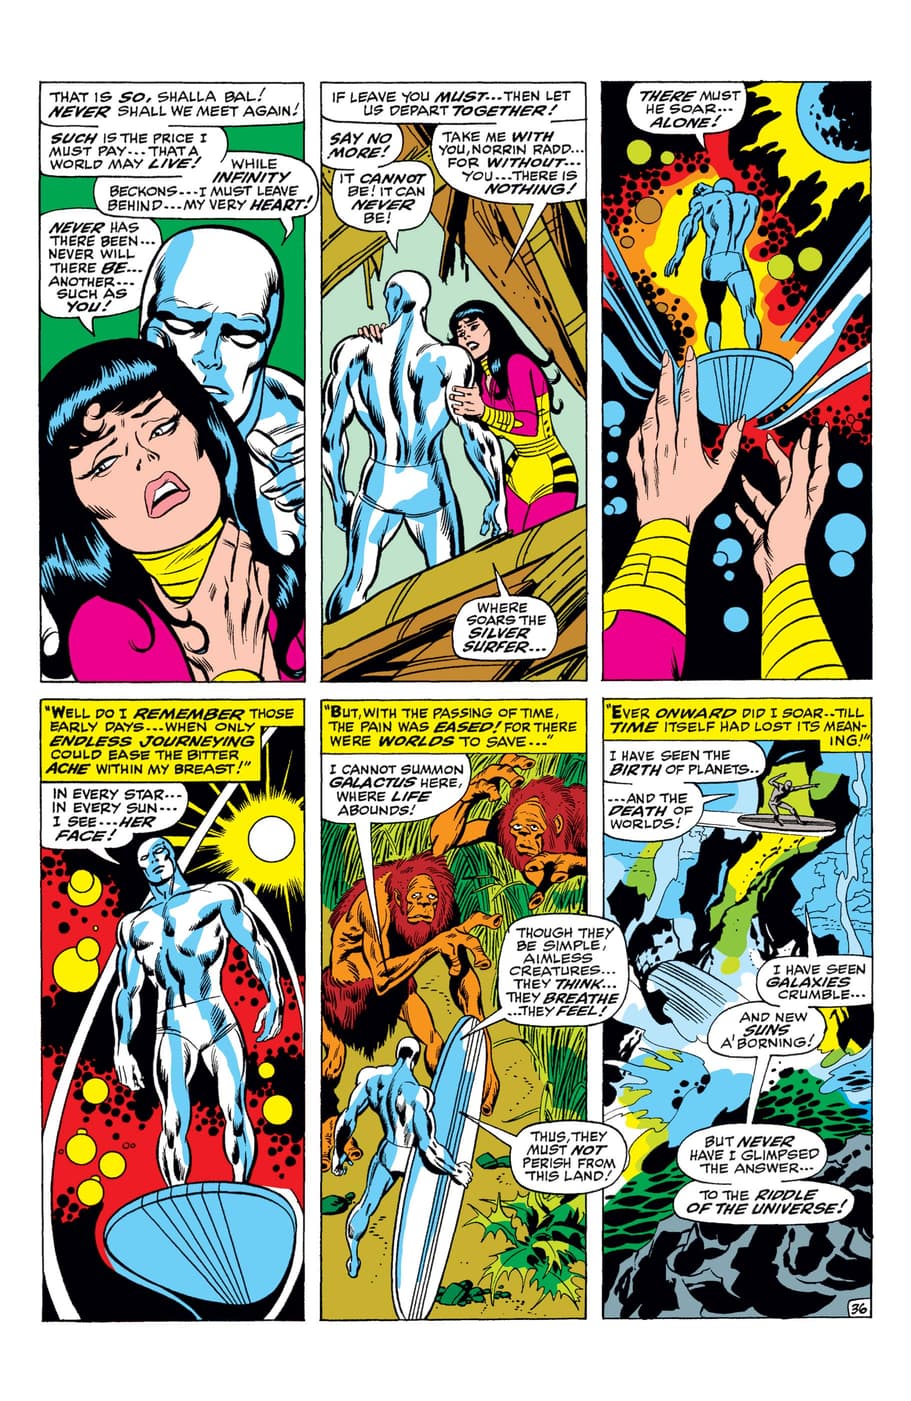 “Where soars the Silver Surfer...there must he soar alone!” – SILVER SURFER (1968) #1